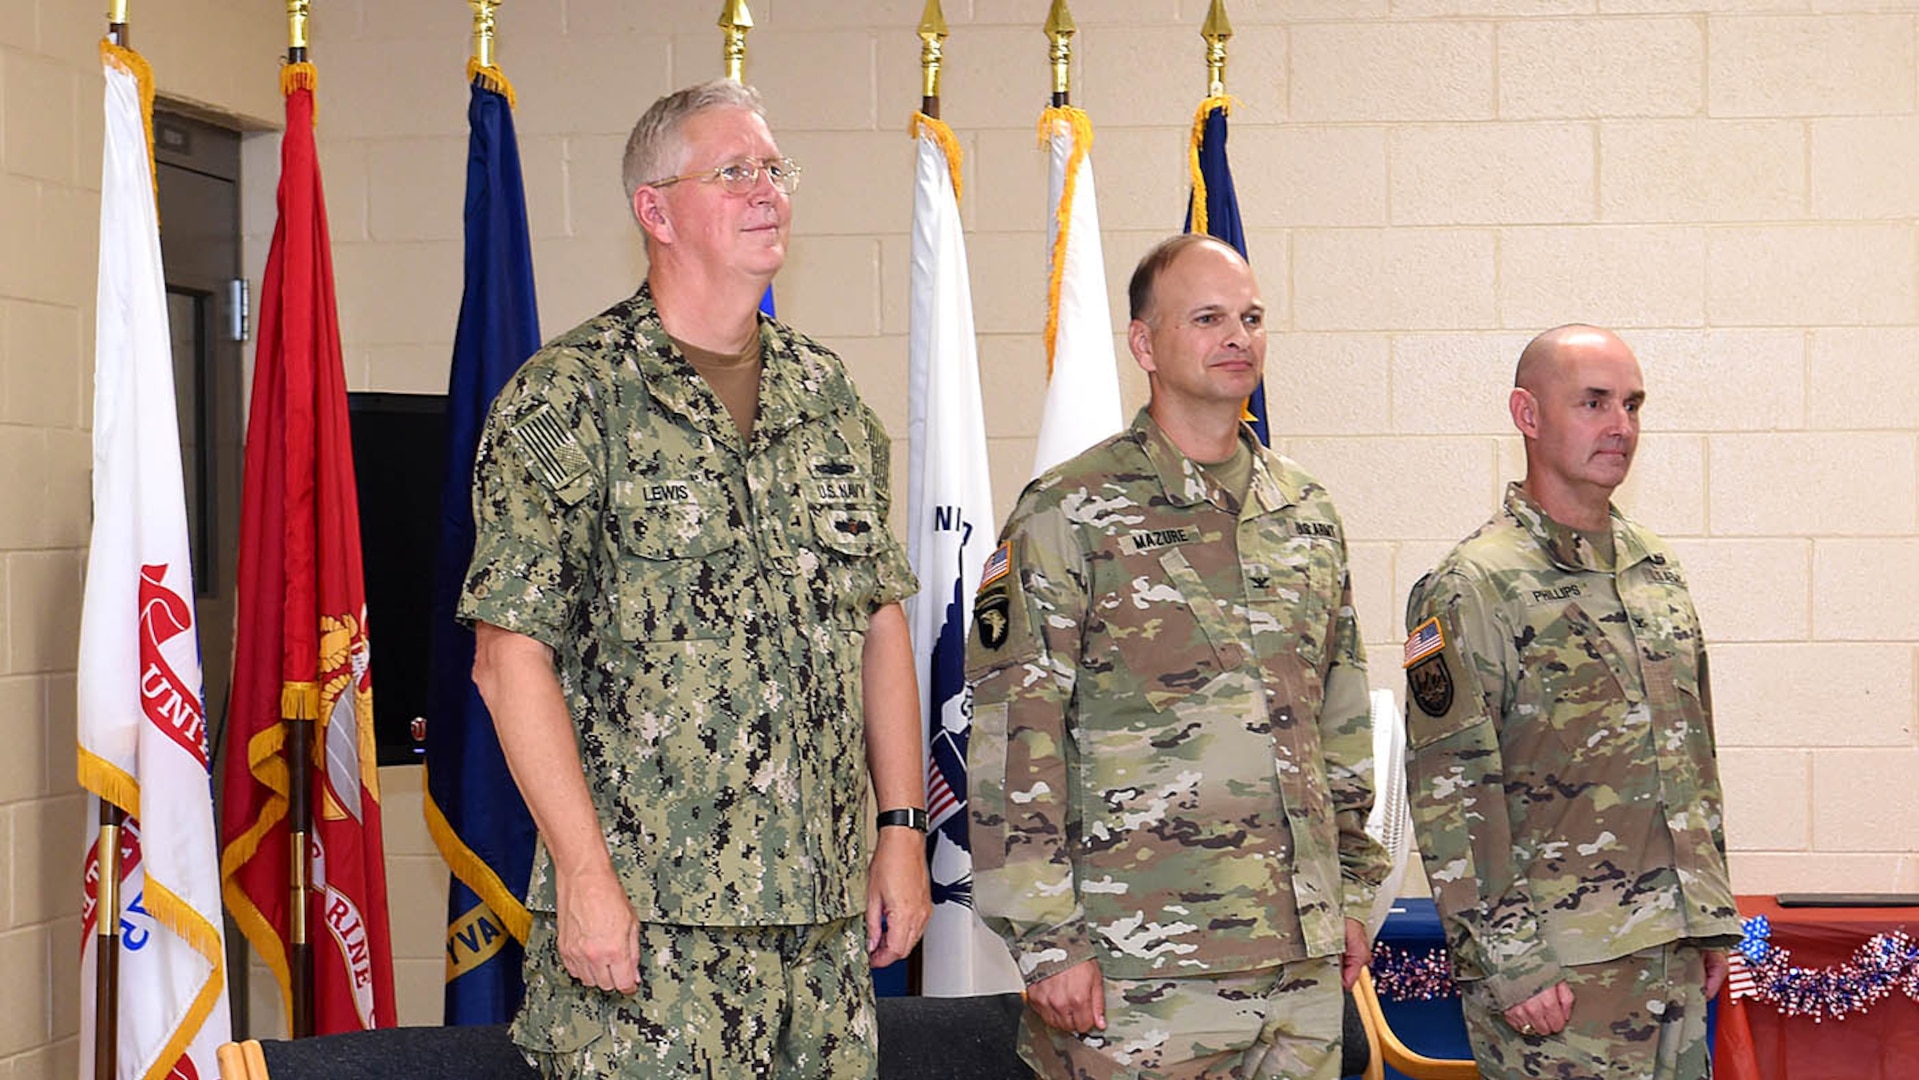 Three commanders standing at attention in front of U.S. and service flags.